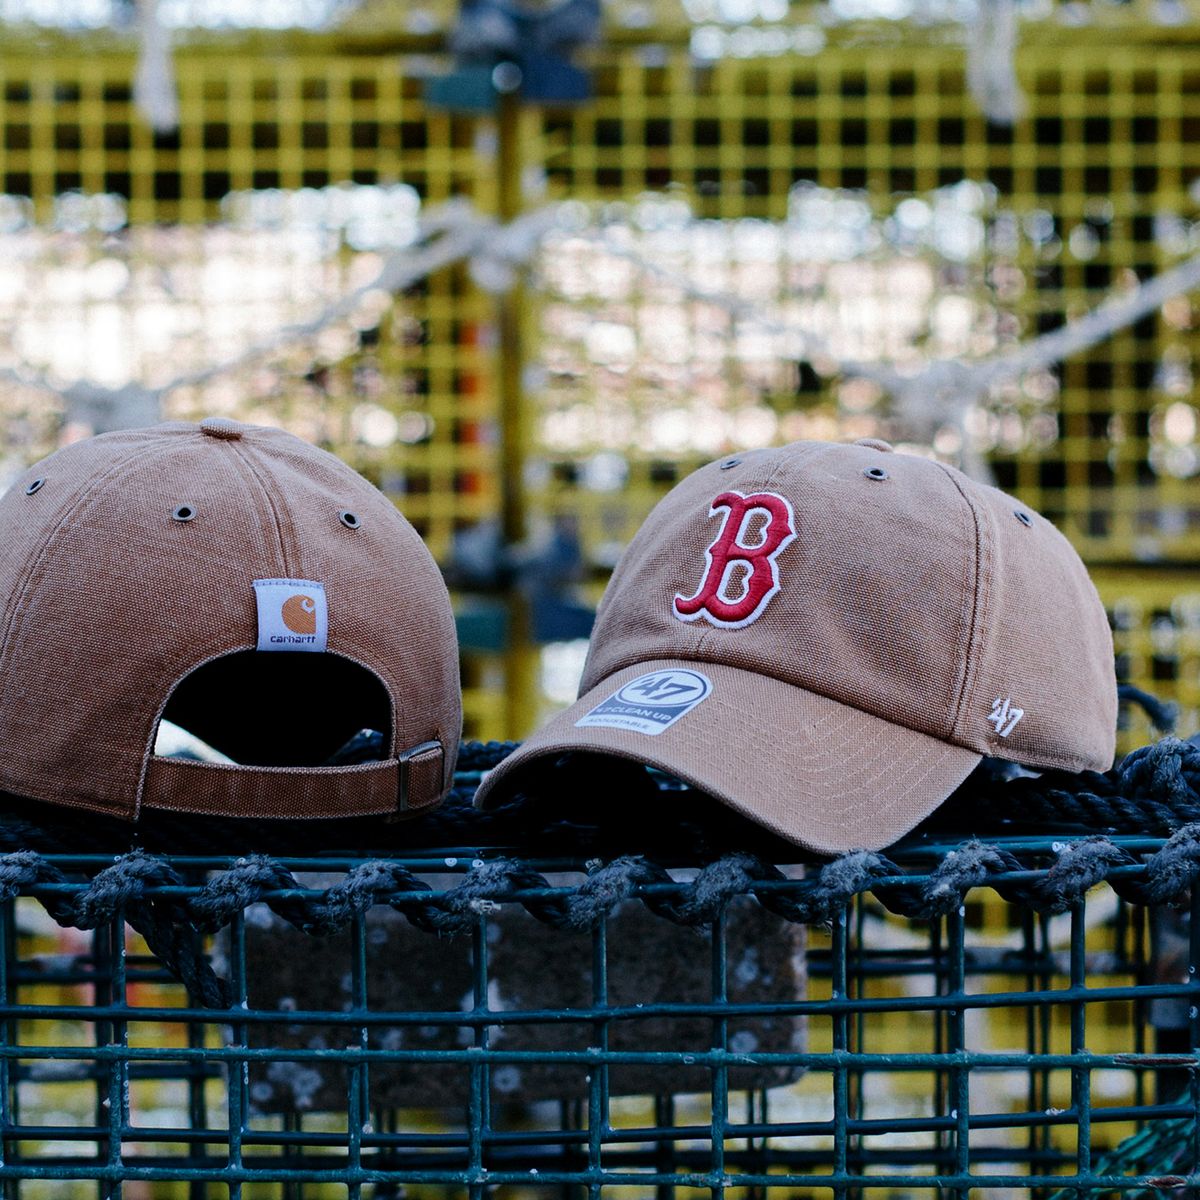 Boston Red Sox Hats by New Era